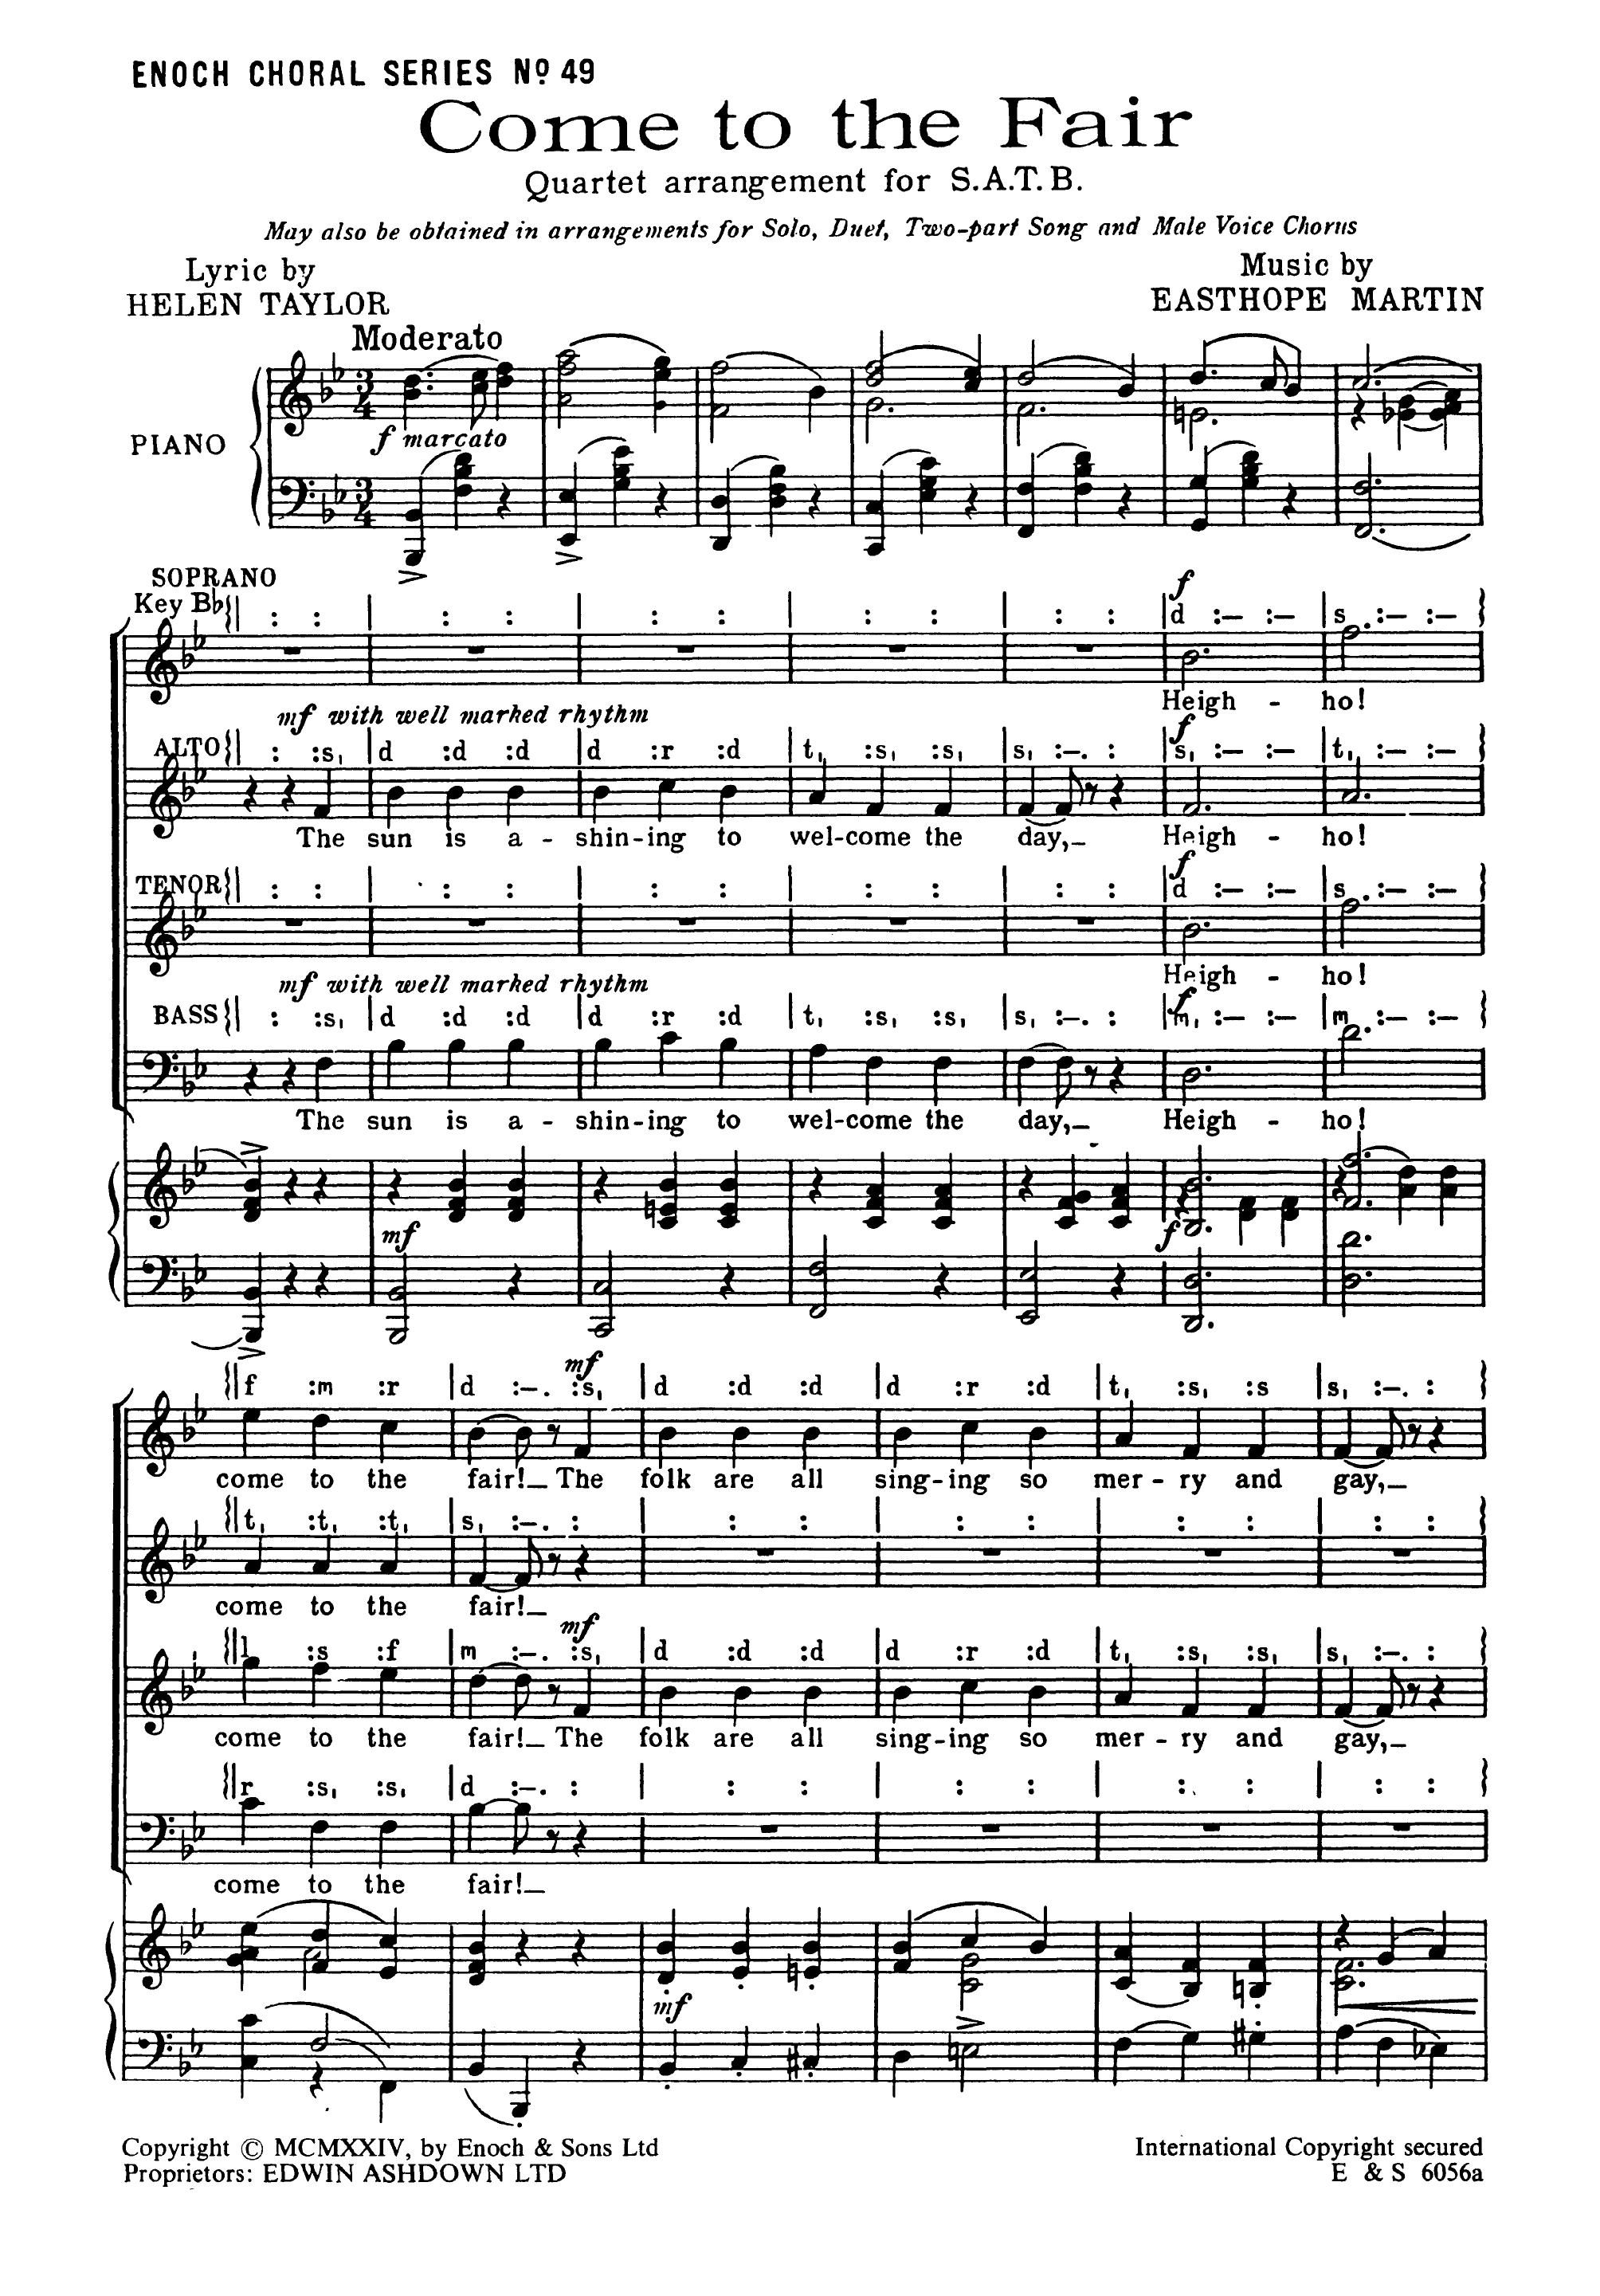 Martin Easthope: Come To The Fair: SATB: Vocal Score